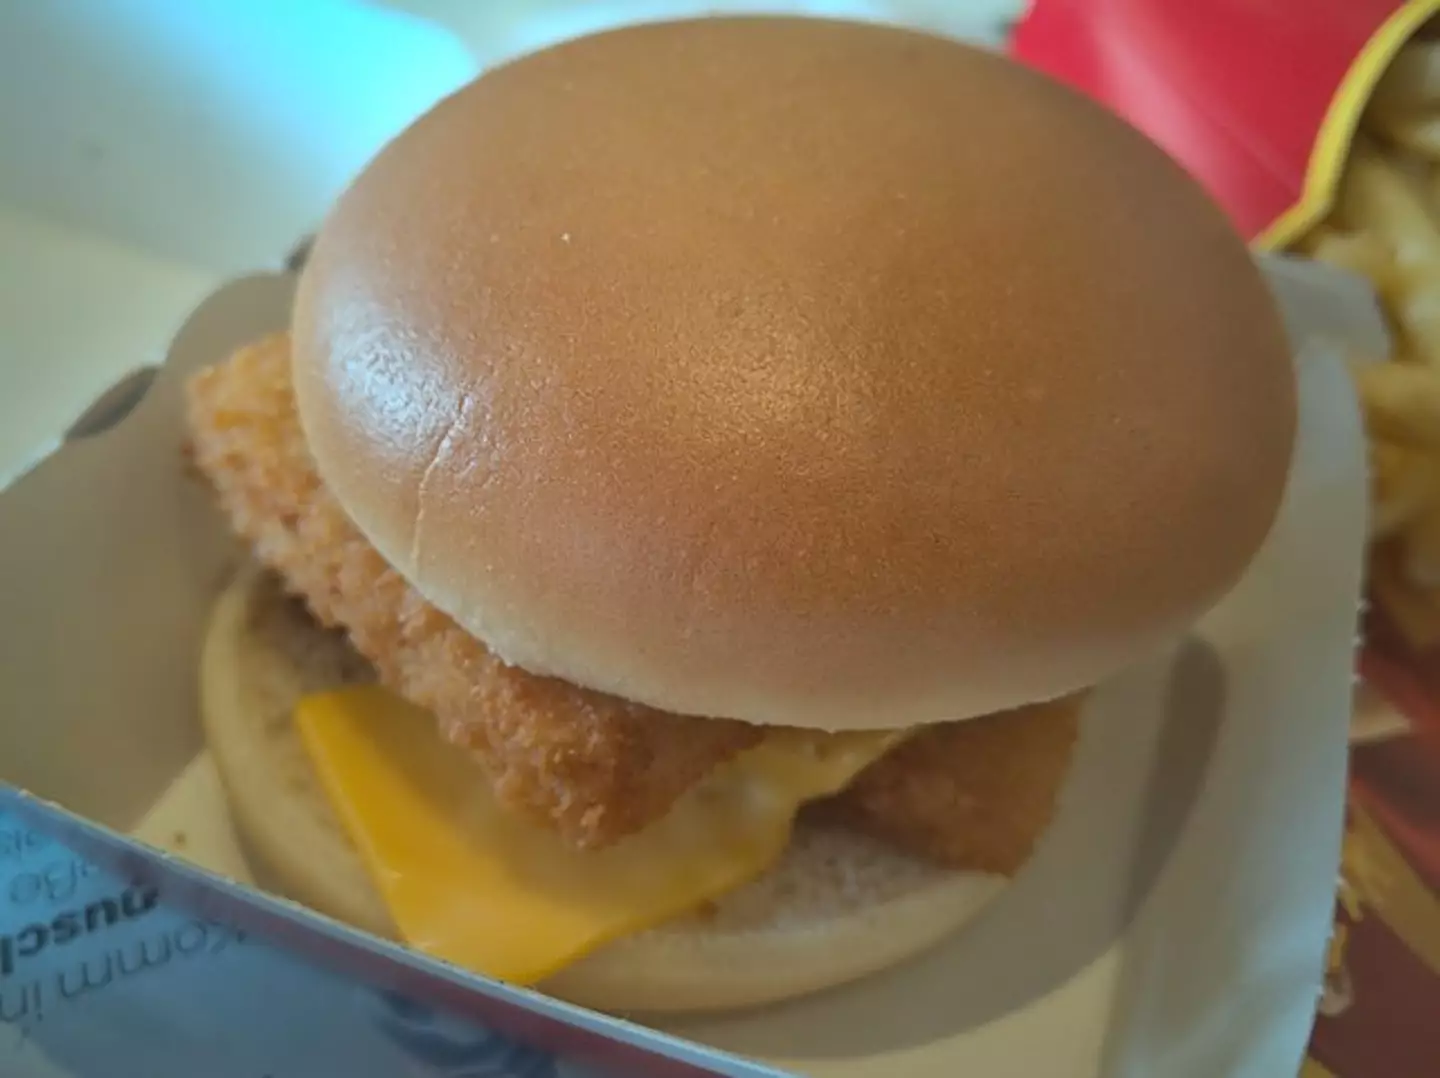 The fight is believed to have started over a Filet-O-Fish.